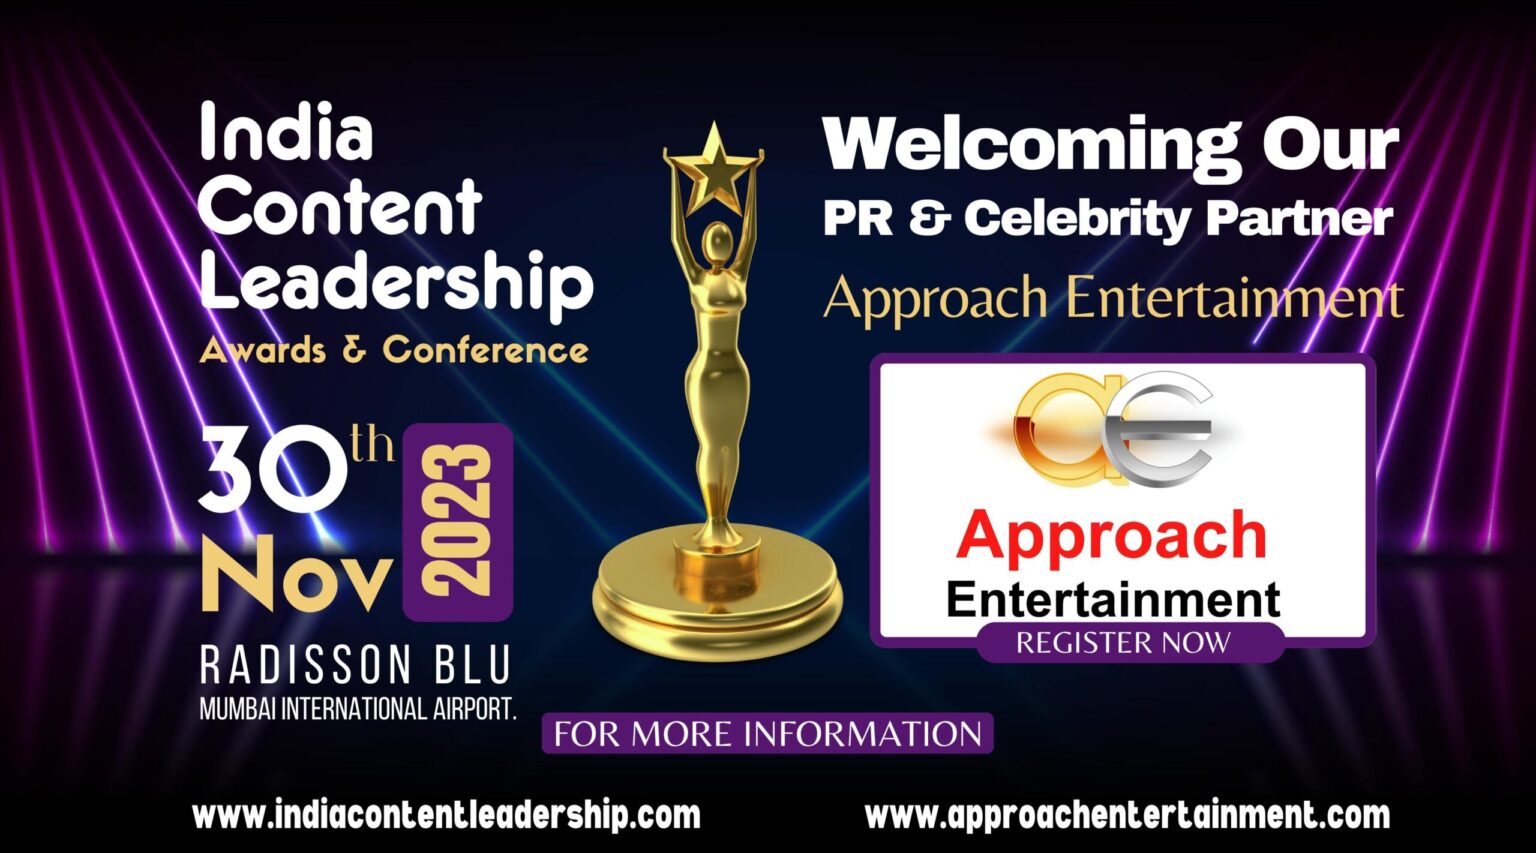 Approach Entertainment Named Exclusive PR & Celebrity Partner for India Content Leadership Awards, Ad World Showdown & Social Stars Awards 2023